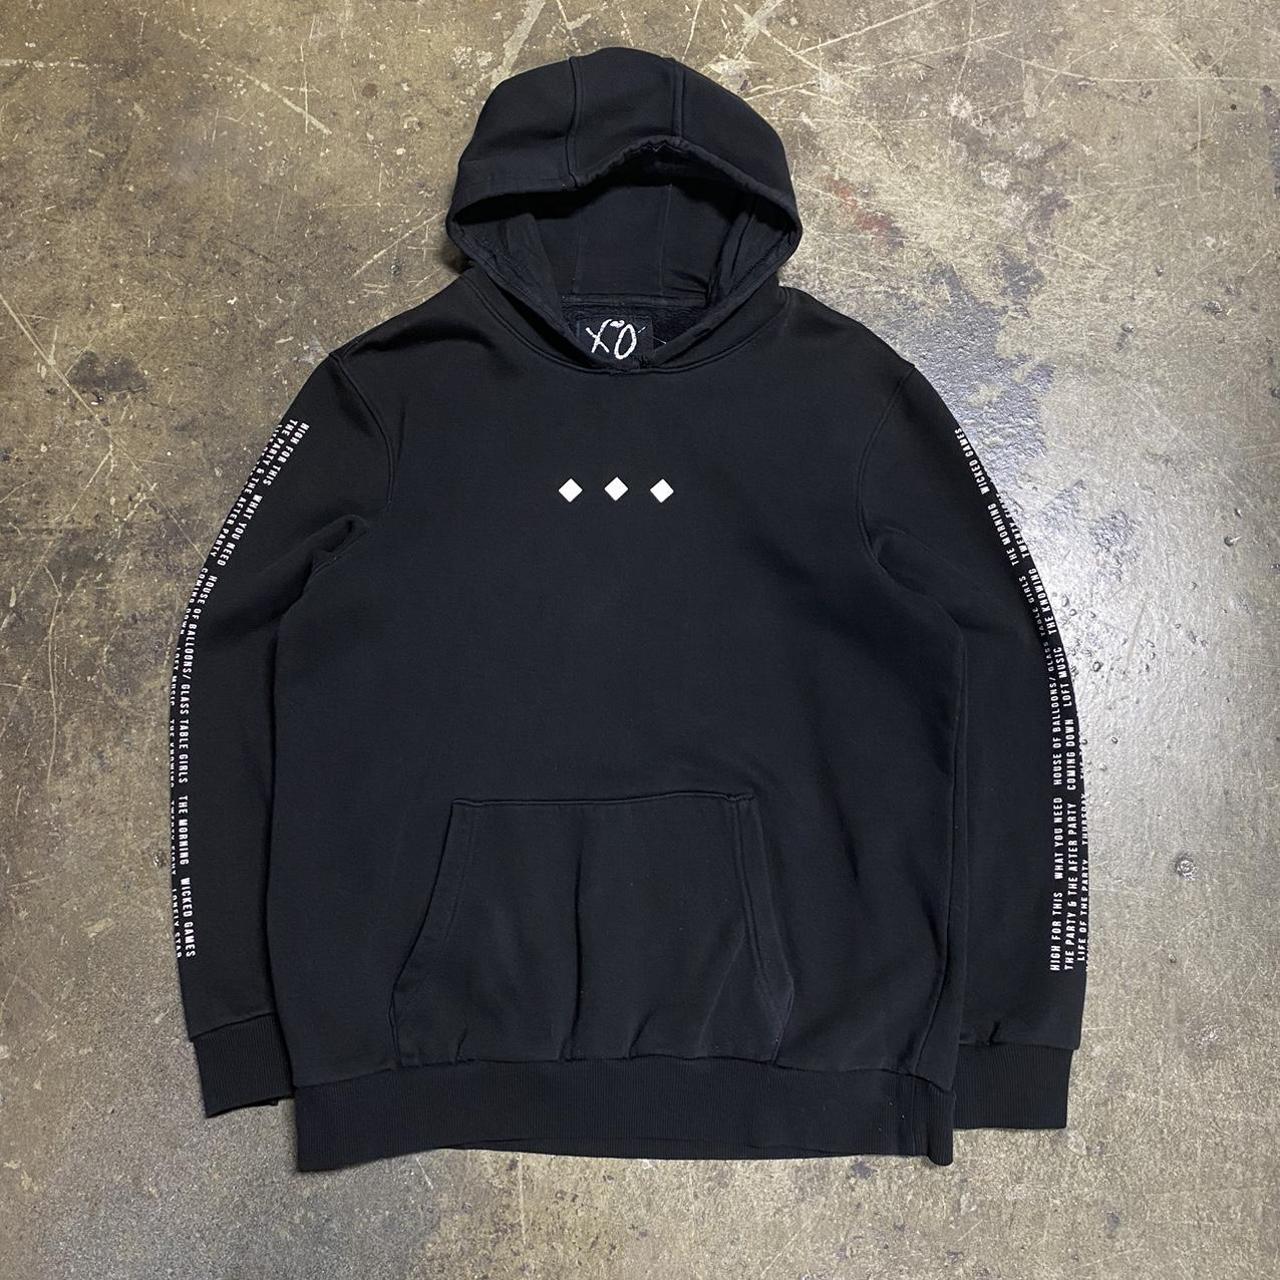 The Weeknd Trilogy 5 Year Anniversary Hoodie Size M LIMITED RELEASE